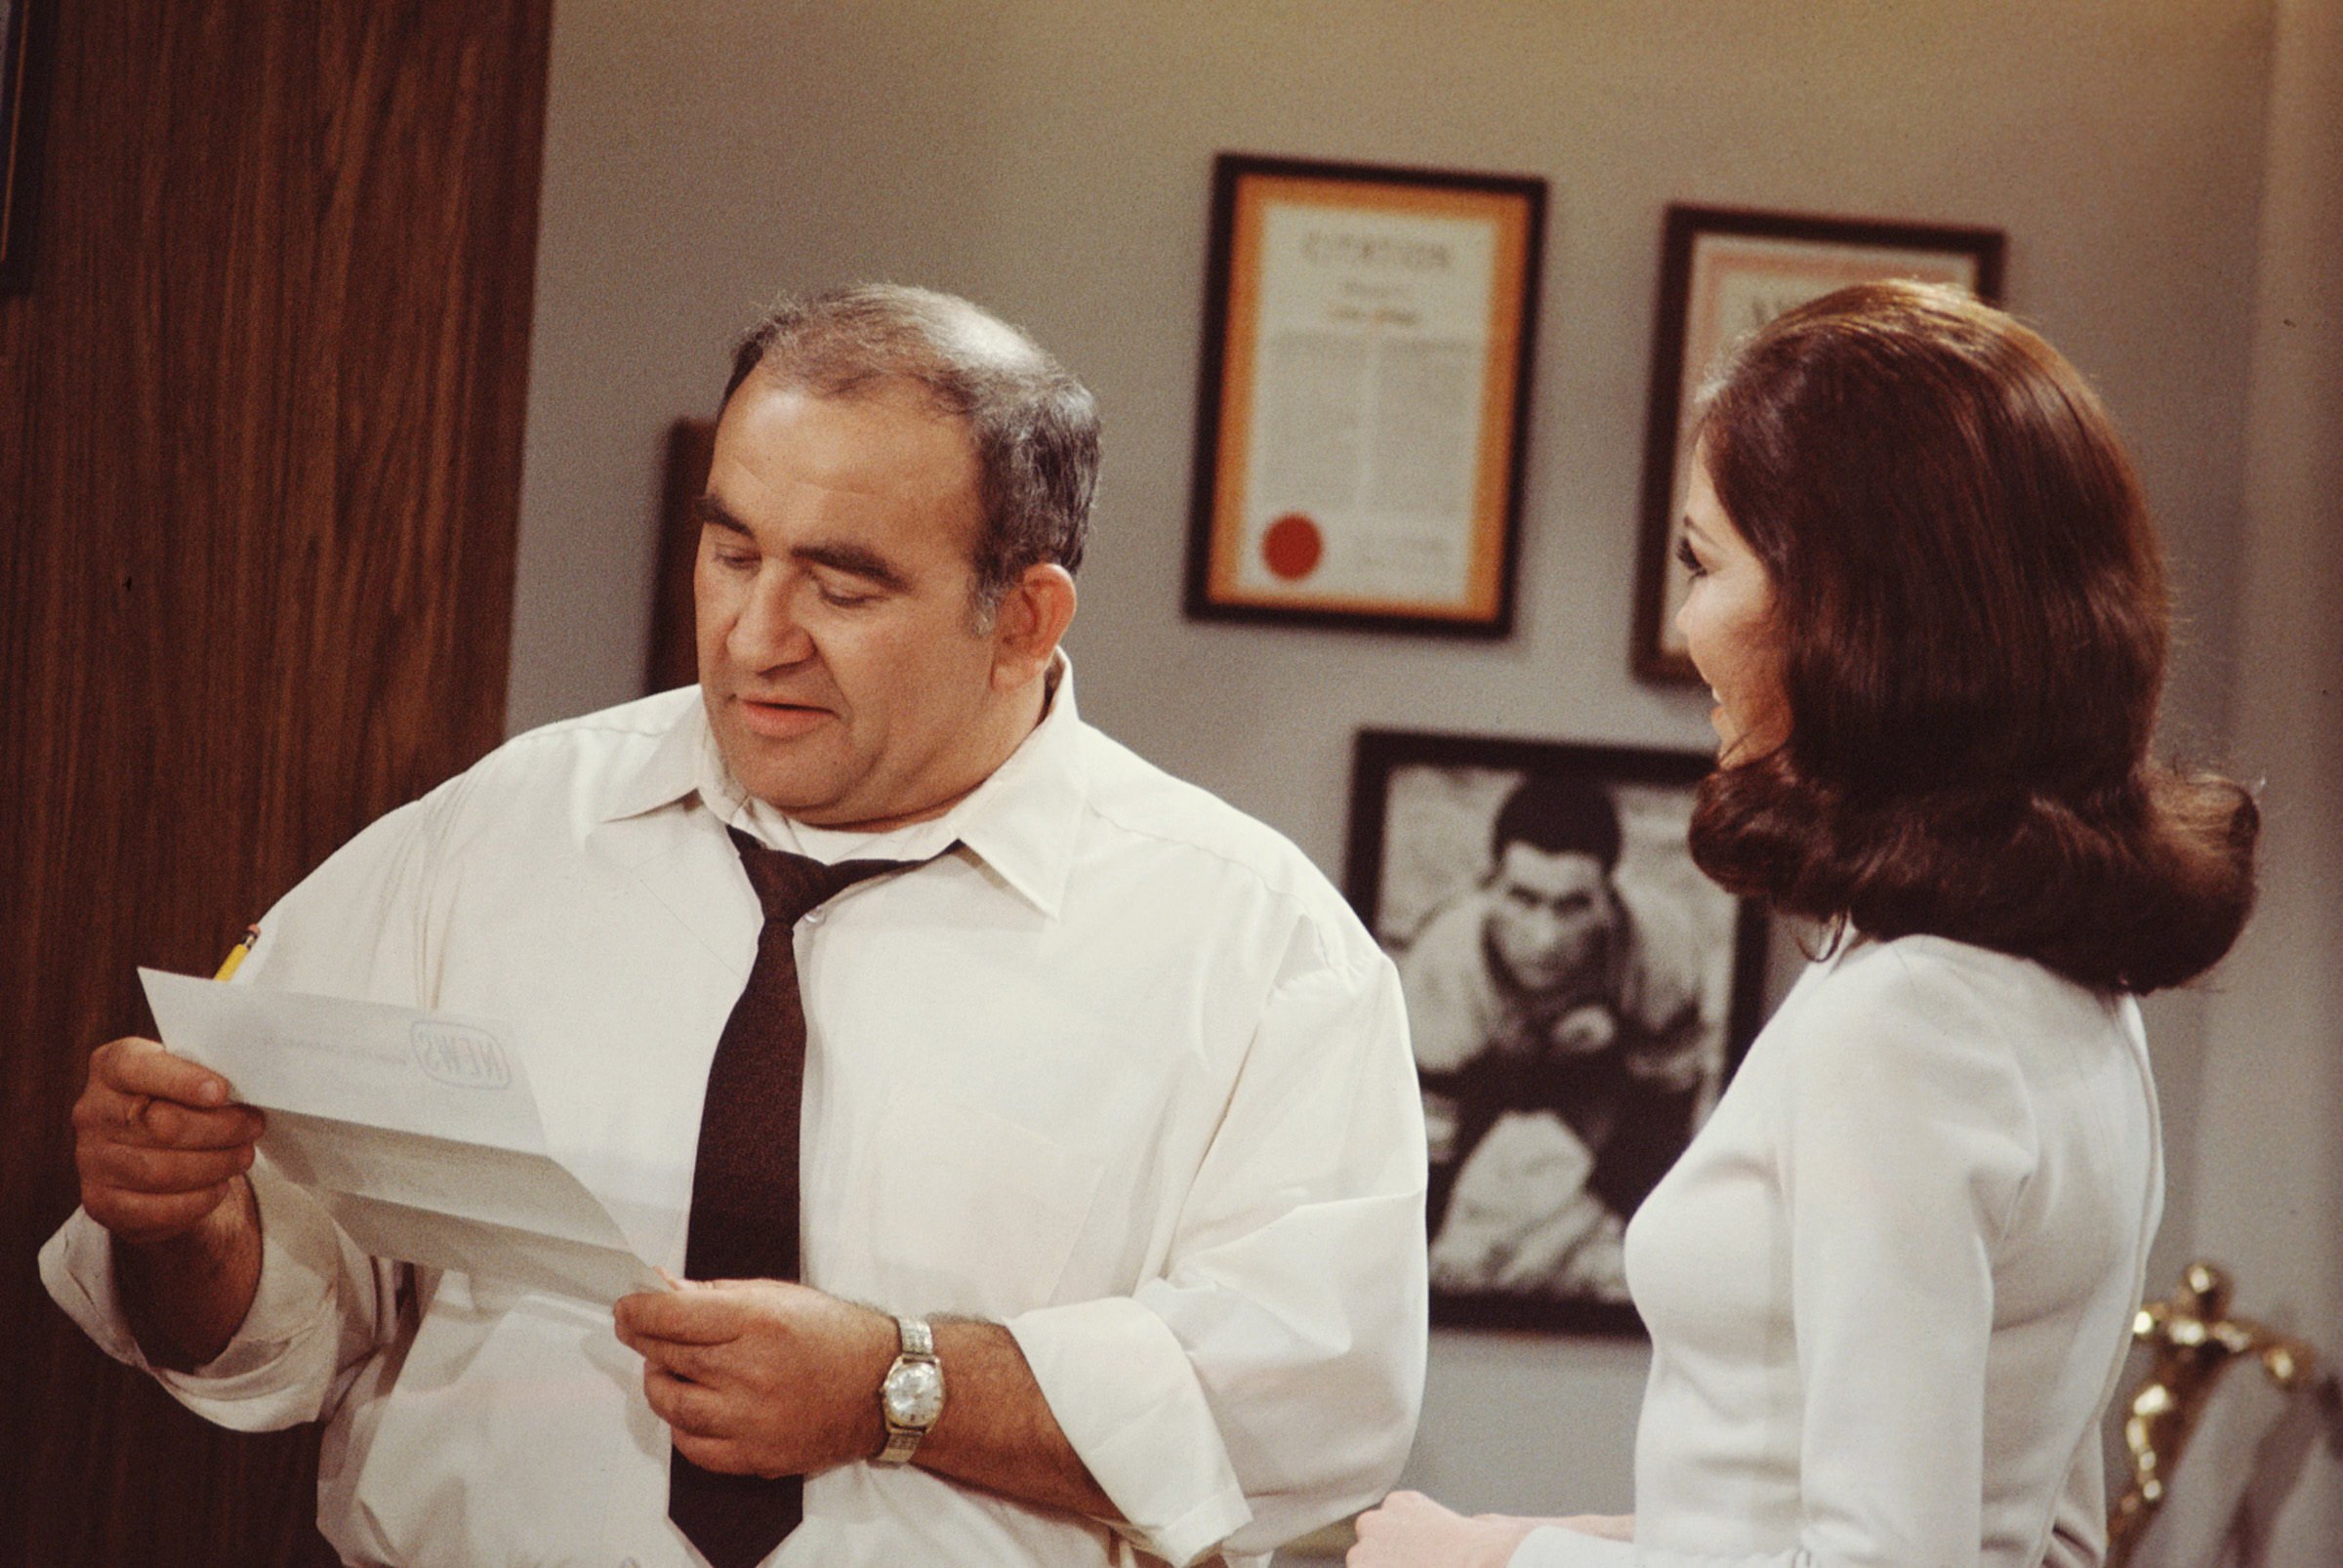 Ed Asner and Mary Tyler Moore pictured on "The Mary Tyler Moore Show," in 1971. | Photo: Getty Images